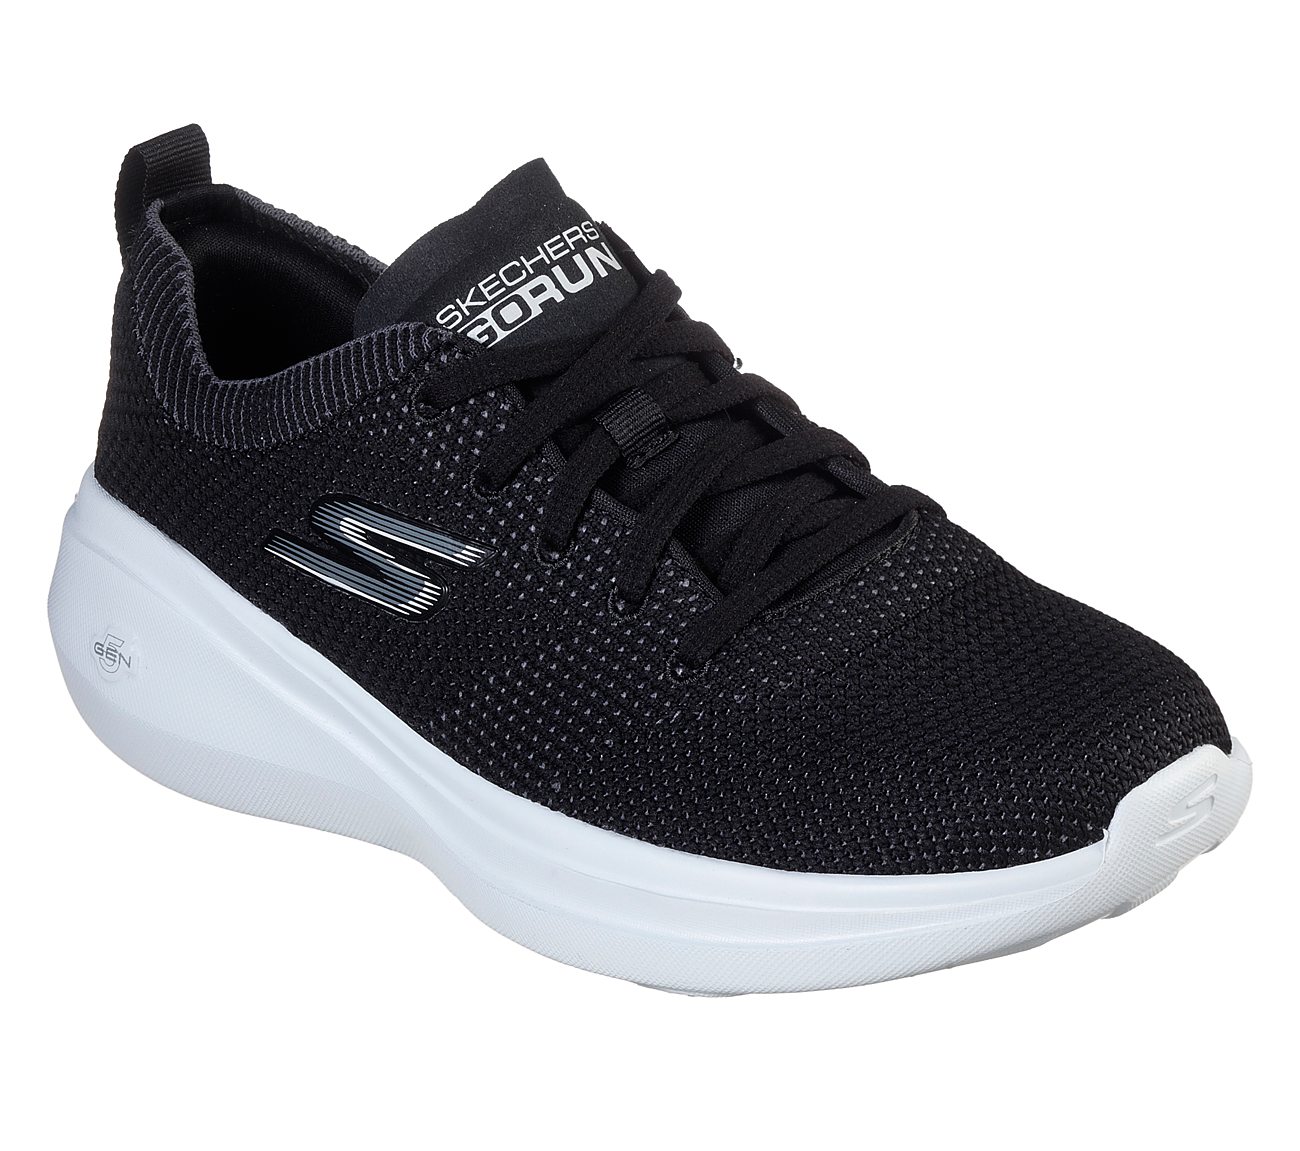 GO RUN FAST - RAPID, BLACK/WHITE Footwear Lateral View